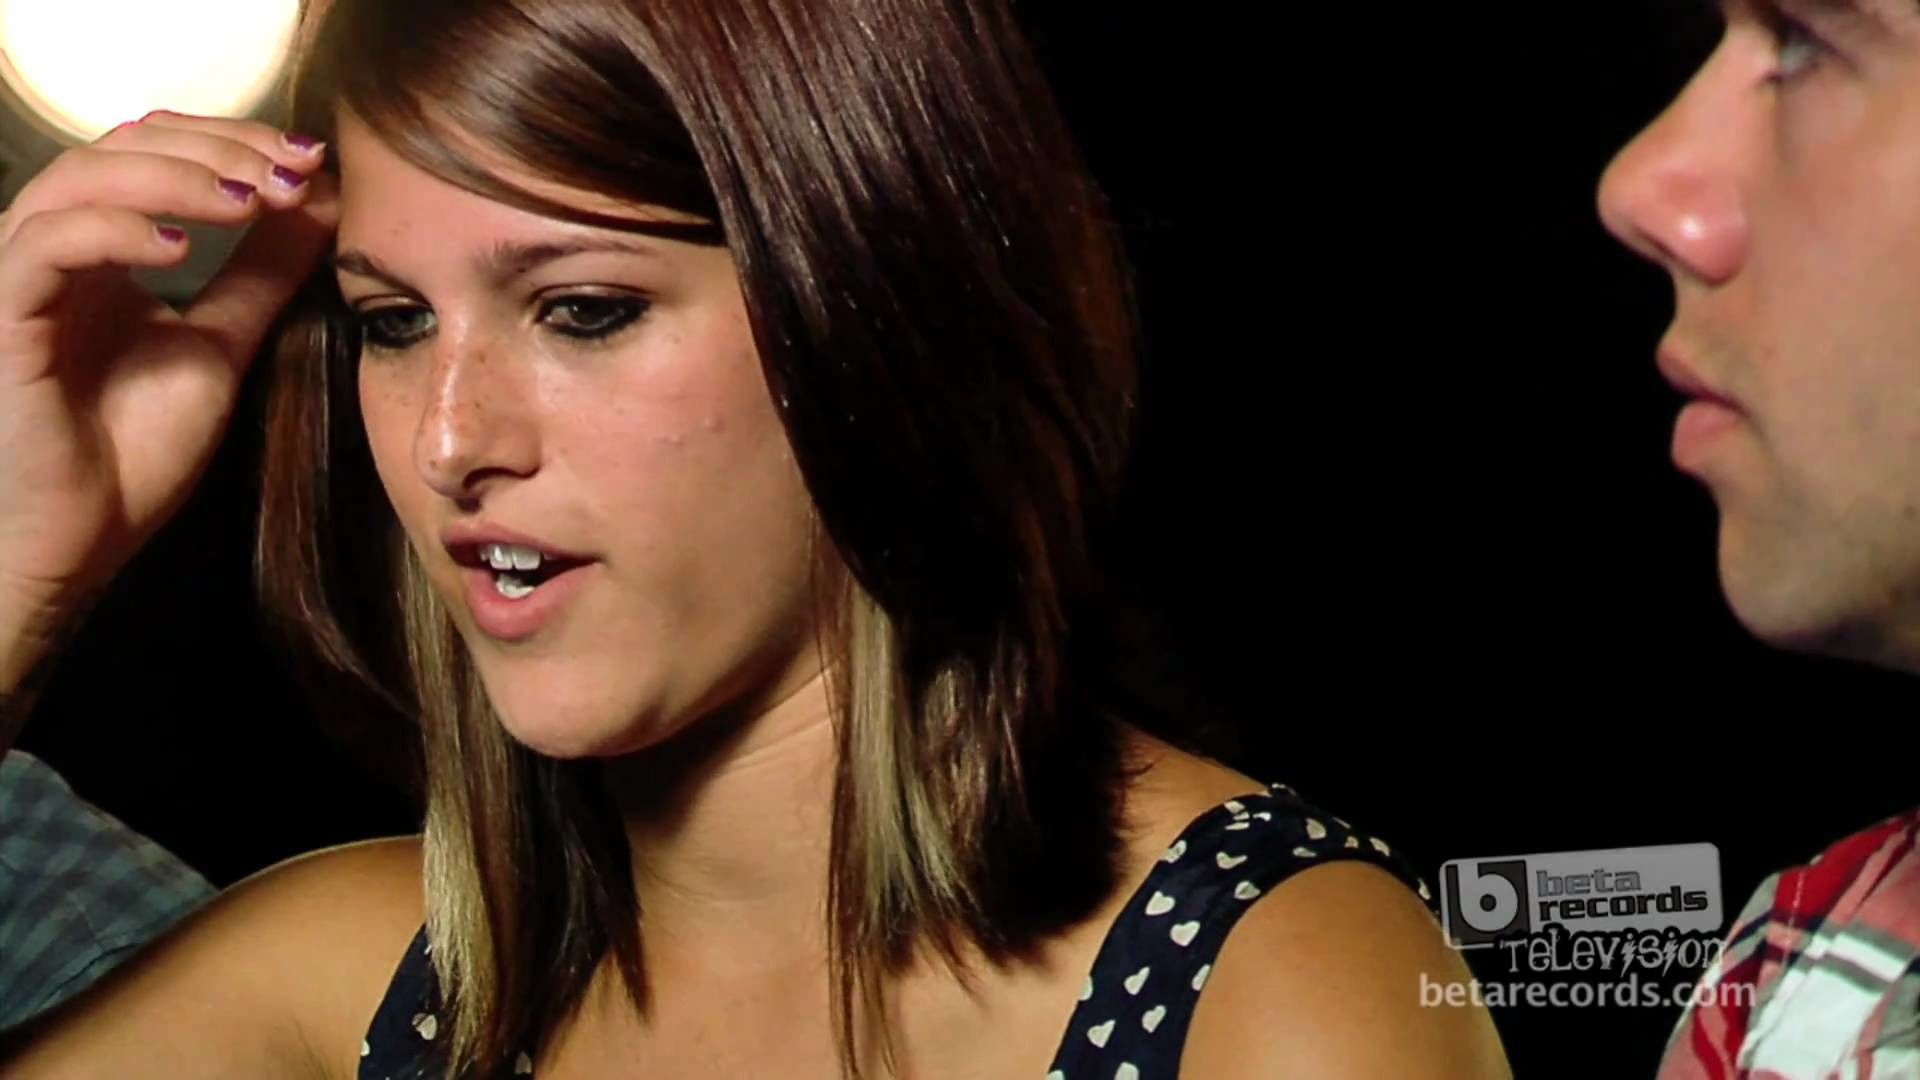 1920x1080 Cassadee Pope and Hey Monday Interview on BETA Records TV